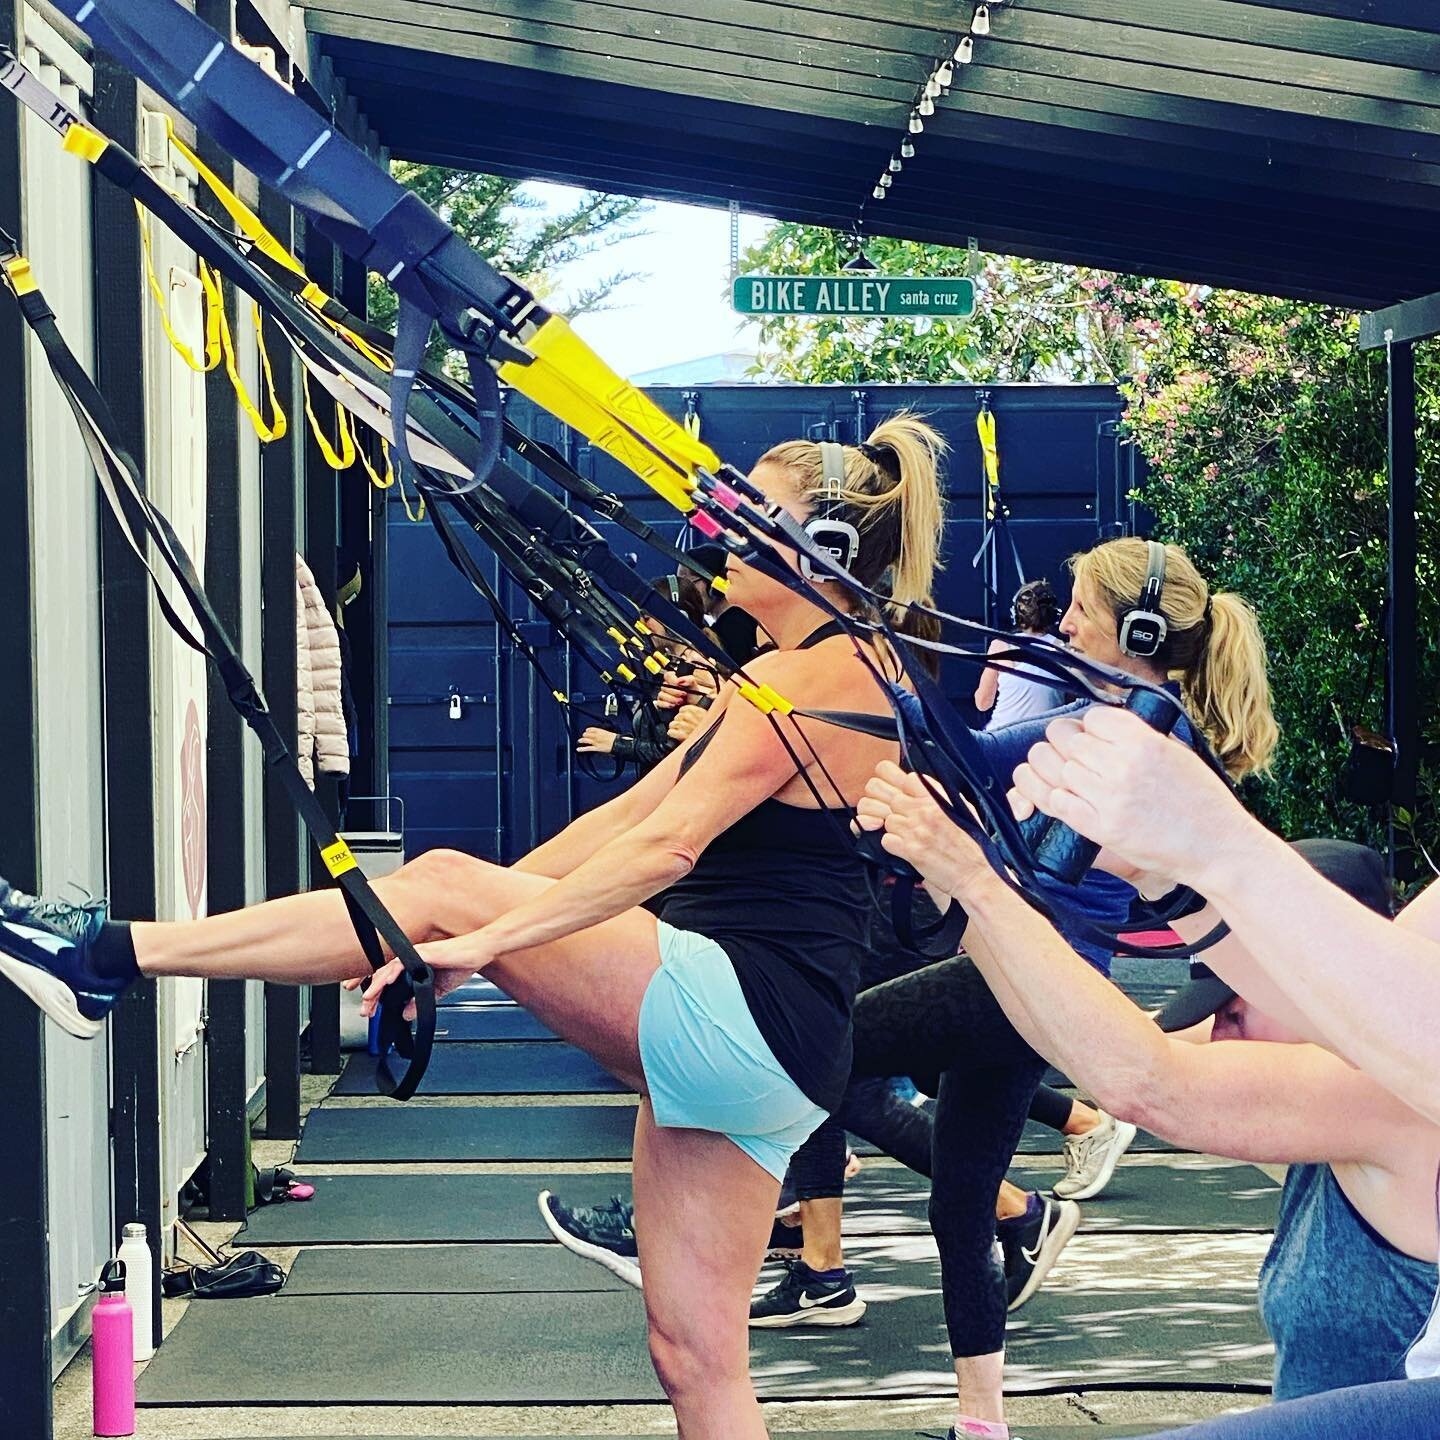 Have you tried a TRX workout?
45 minutes - full body training!